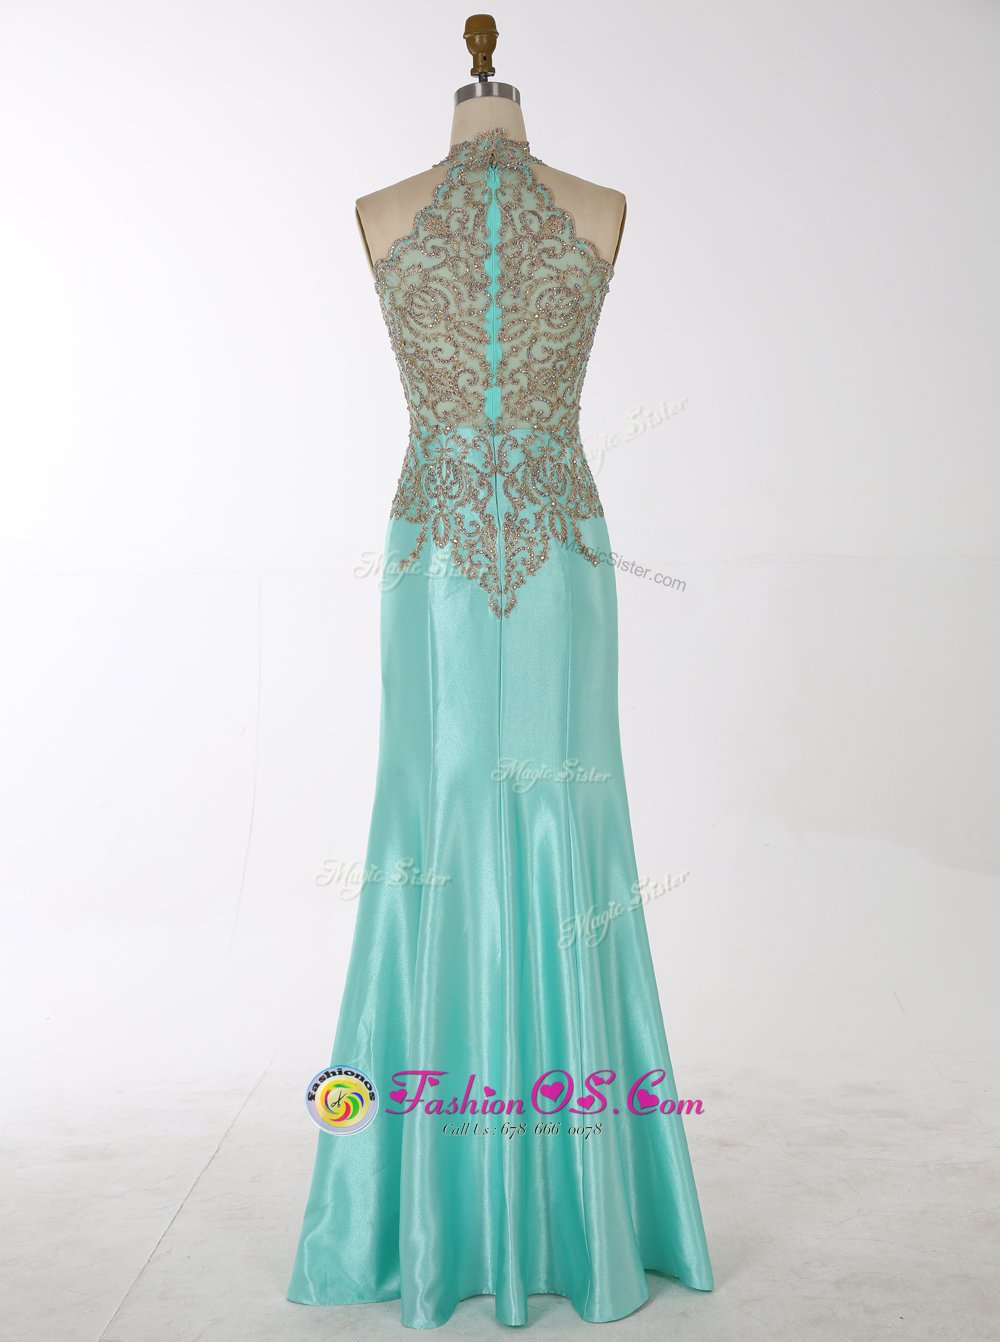 Unique Mermaid Sleeveless Satin Floor Length Zipper Evening Party Dresses in Aqua Blue for with Beading